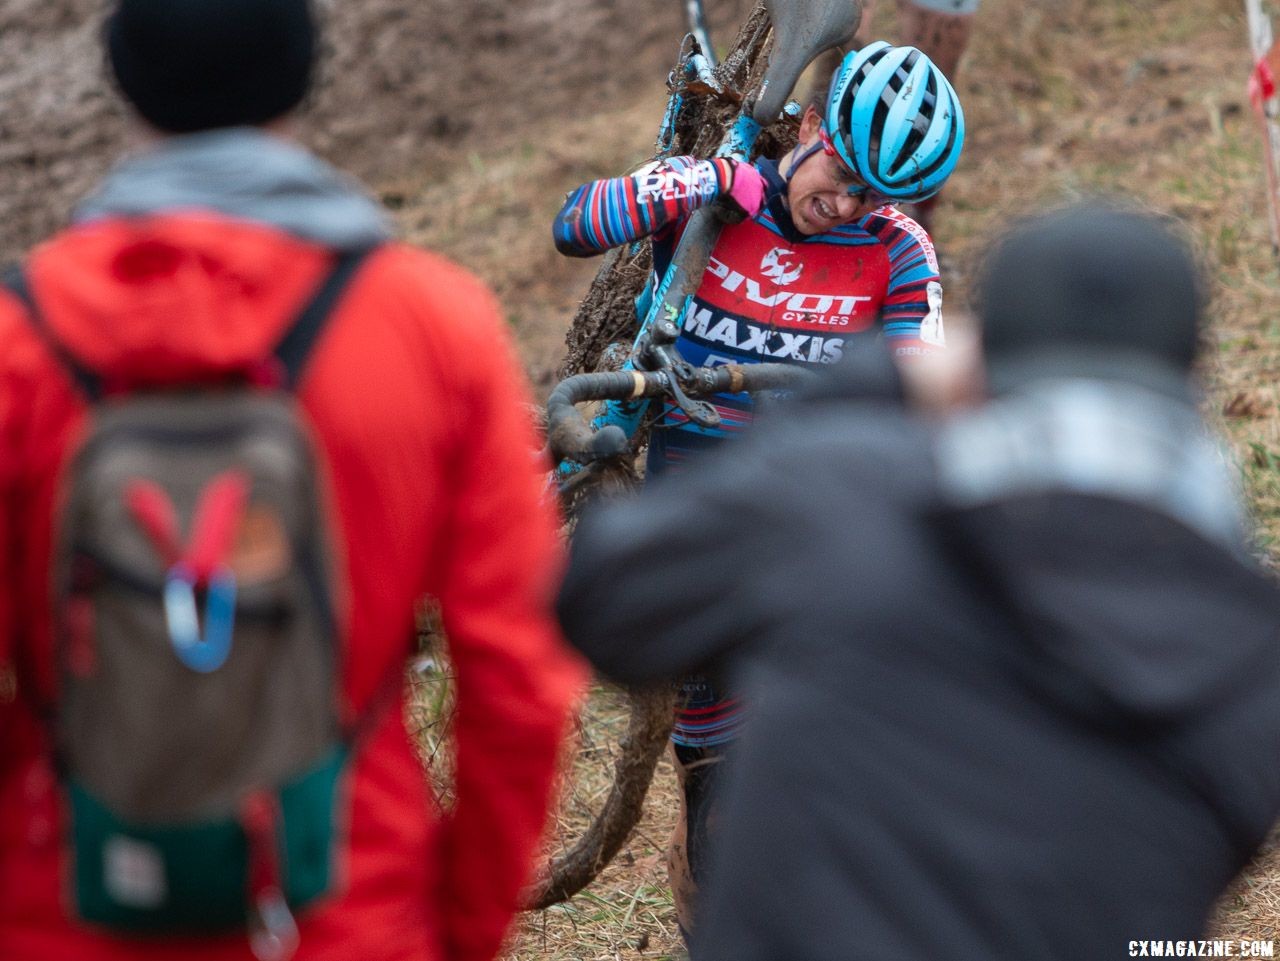 Courtenay McFadden shoulders her bike on one of the course's many running sections. Elite Women. 2018 Cyclocross National Championships, Louisville, KY. © A. Yee / Cyclocross Magazine